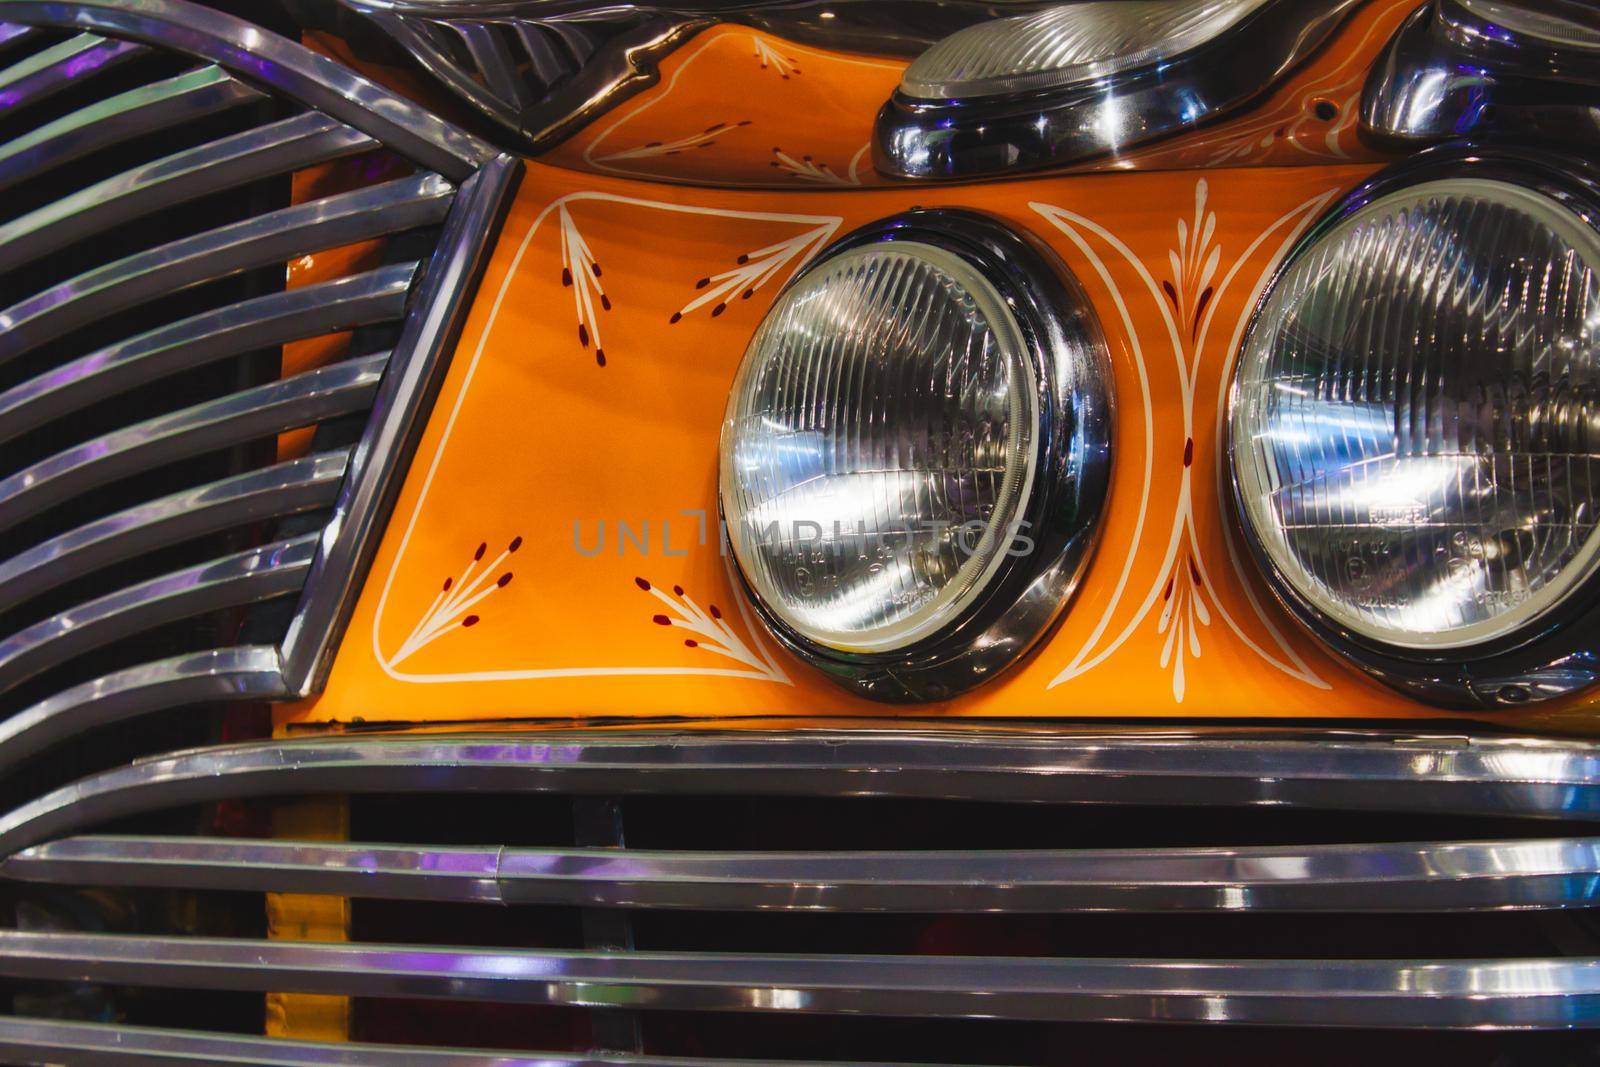 Close-up details of a vintage Maltese bus with headlamps and grill